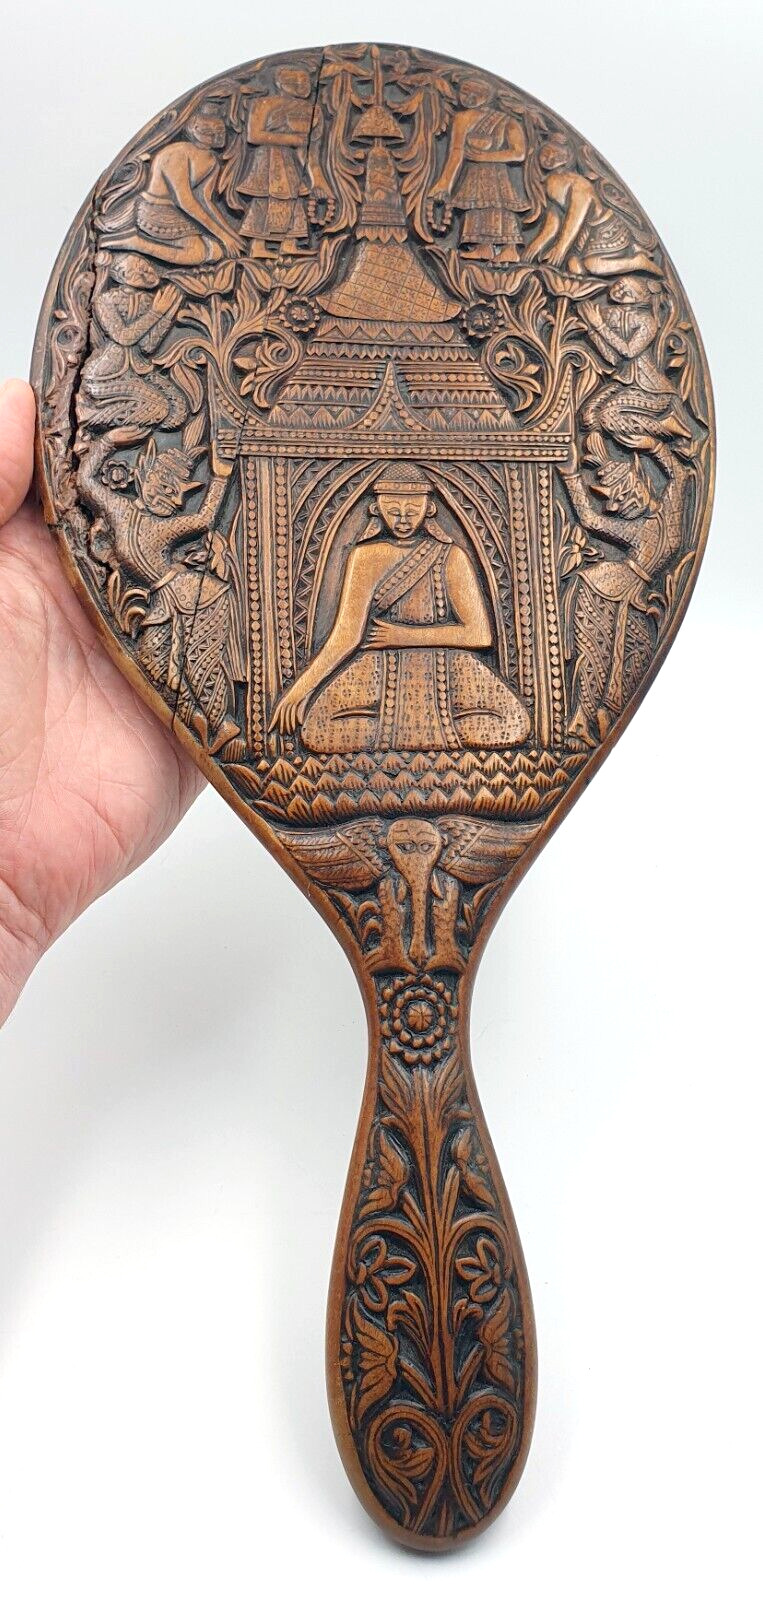 Beautiful hand carved Thai wooden hand mirror - Very rare & stunning carving